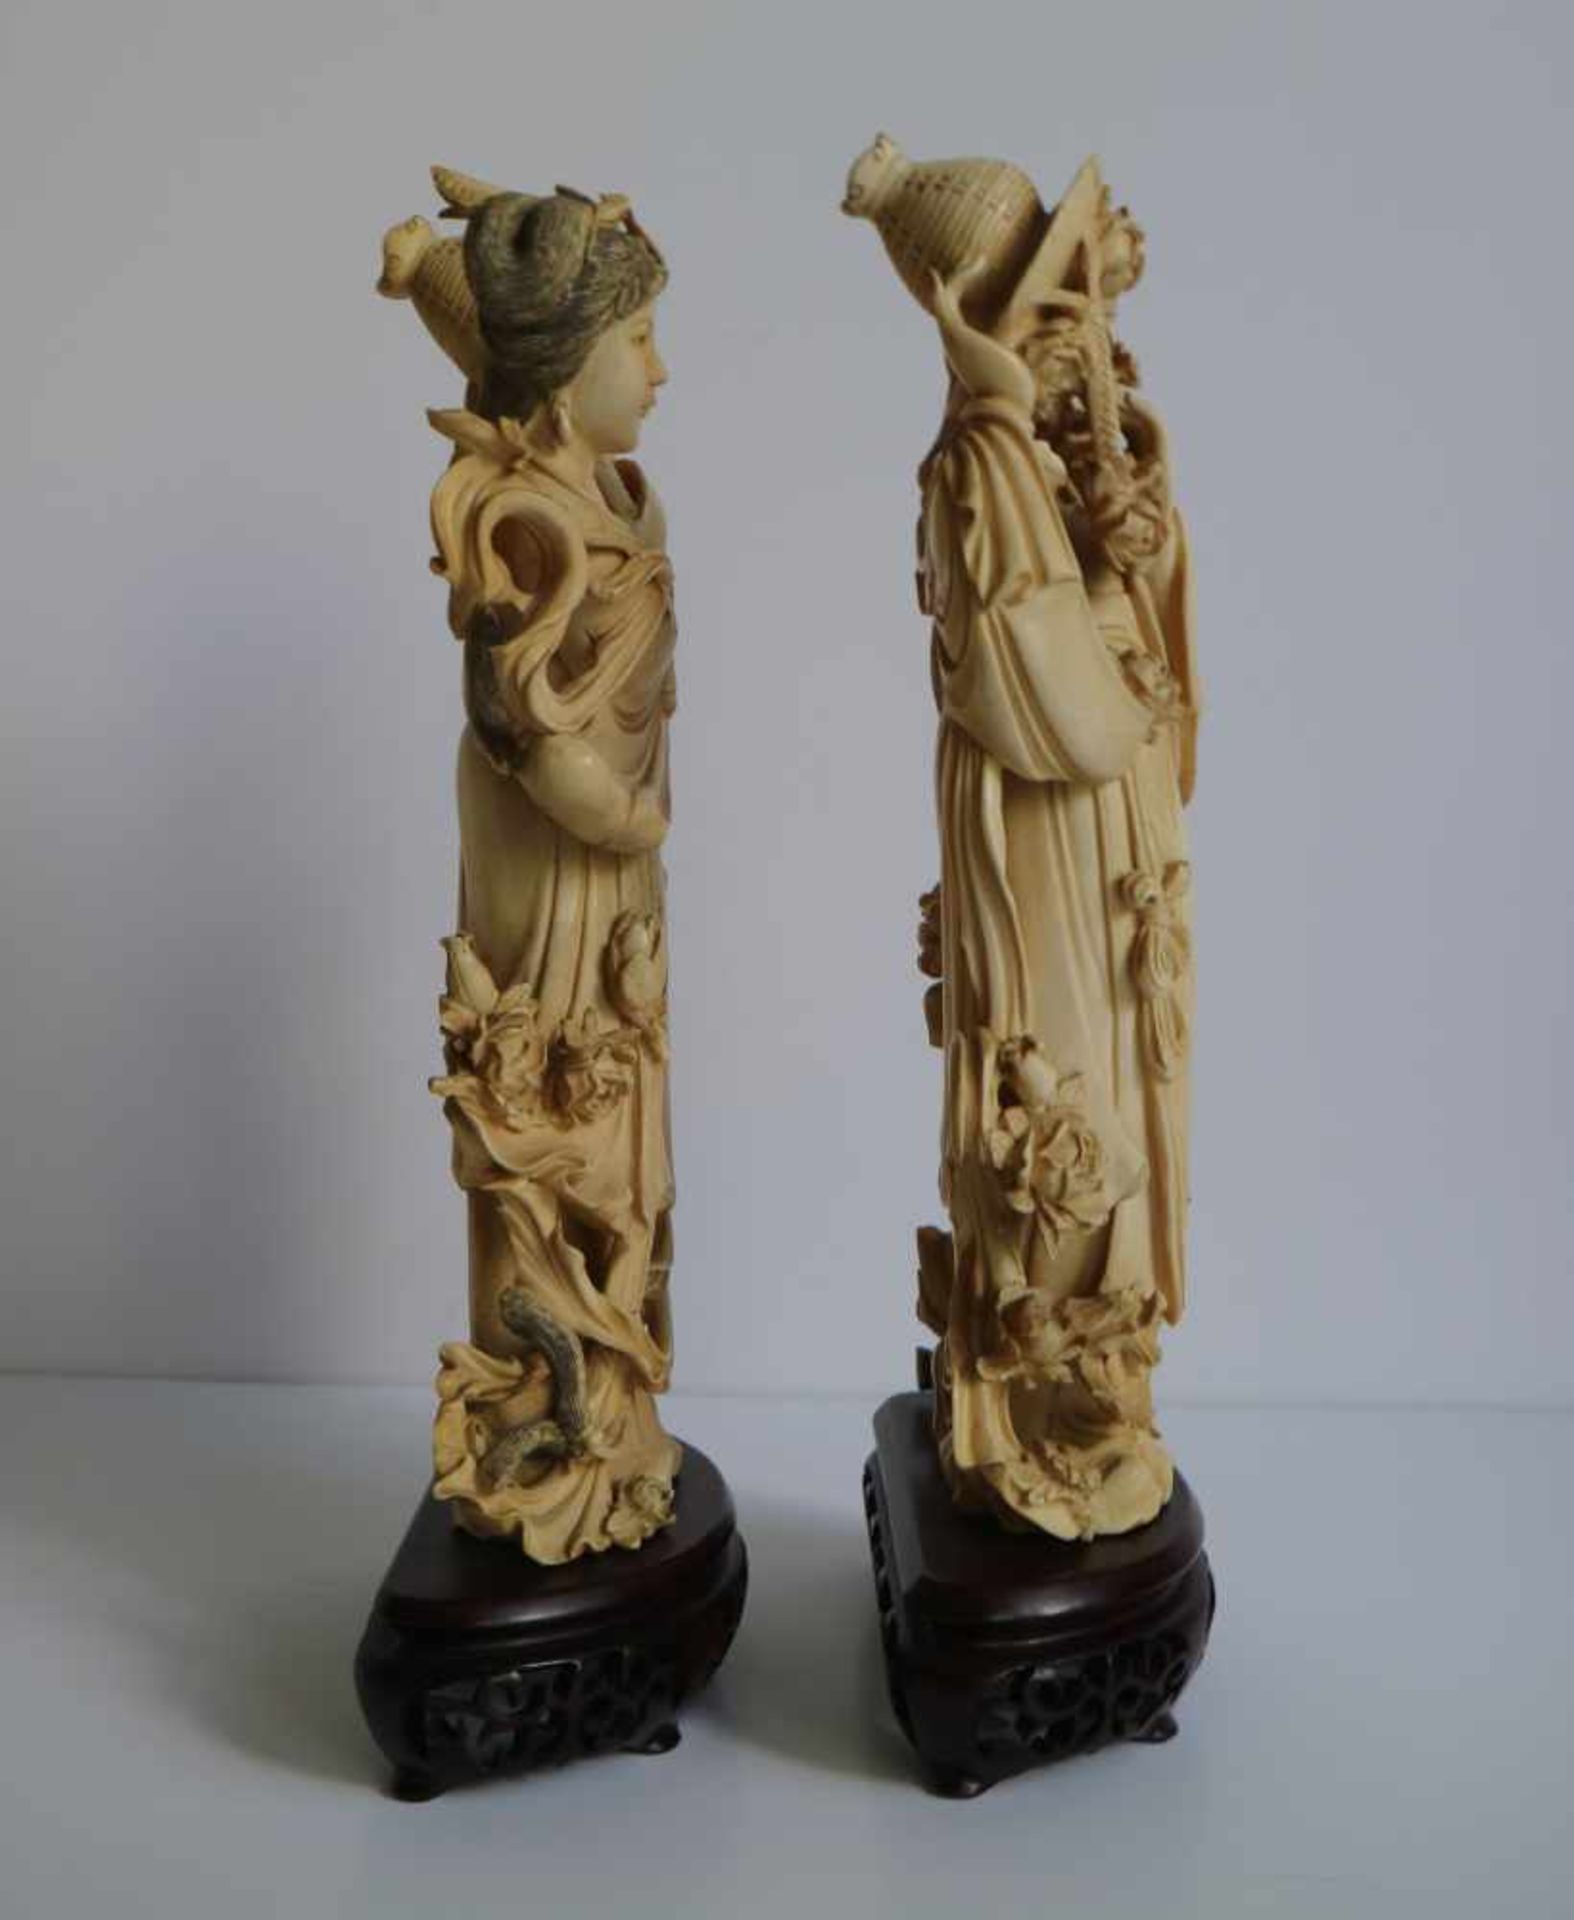 Ivory figures by He Xiangu with flowers symmetrically carved, China Republic period H 28,5 cm + 4,5 - Bild 2 aus 4